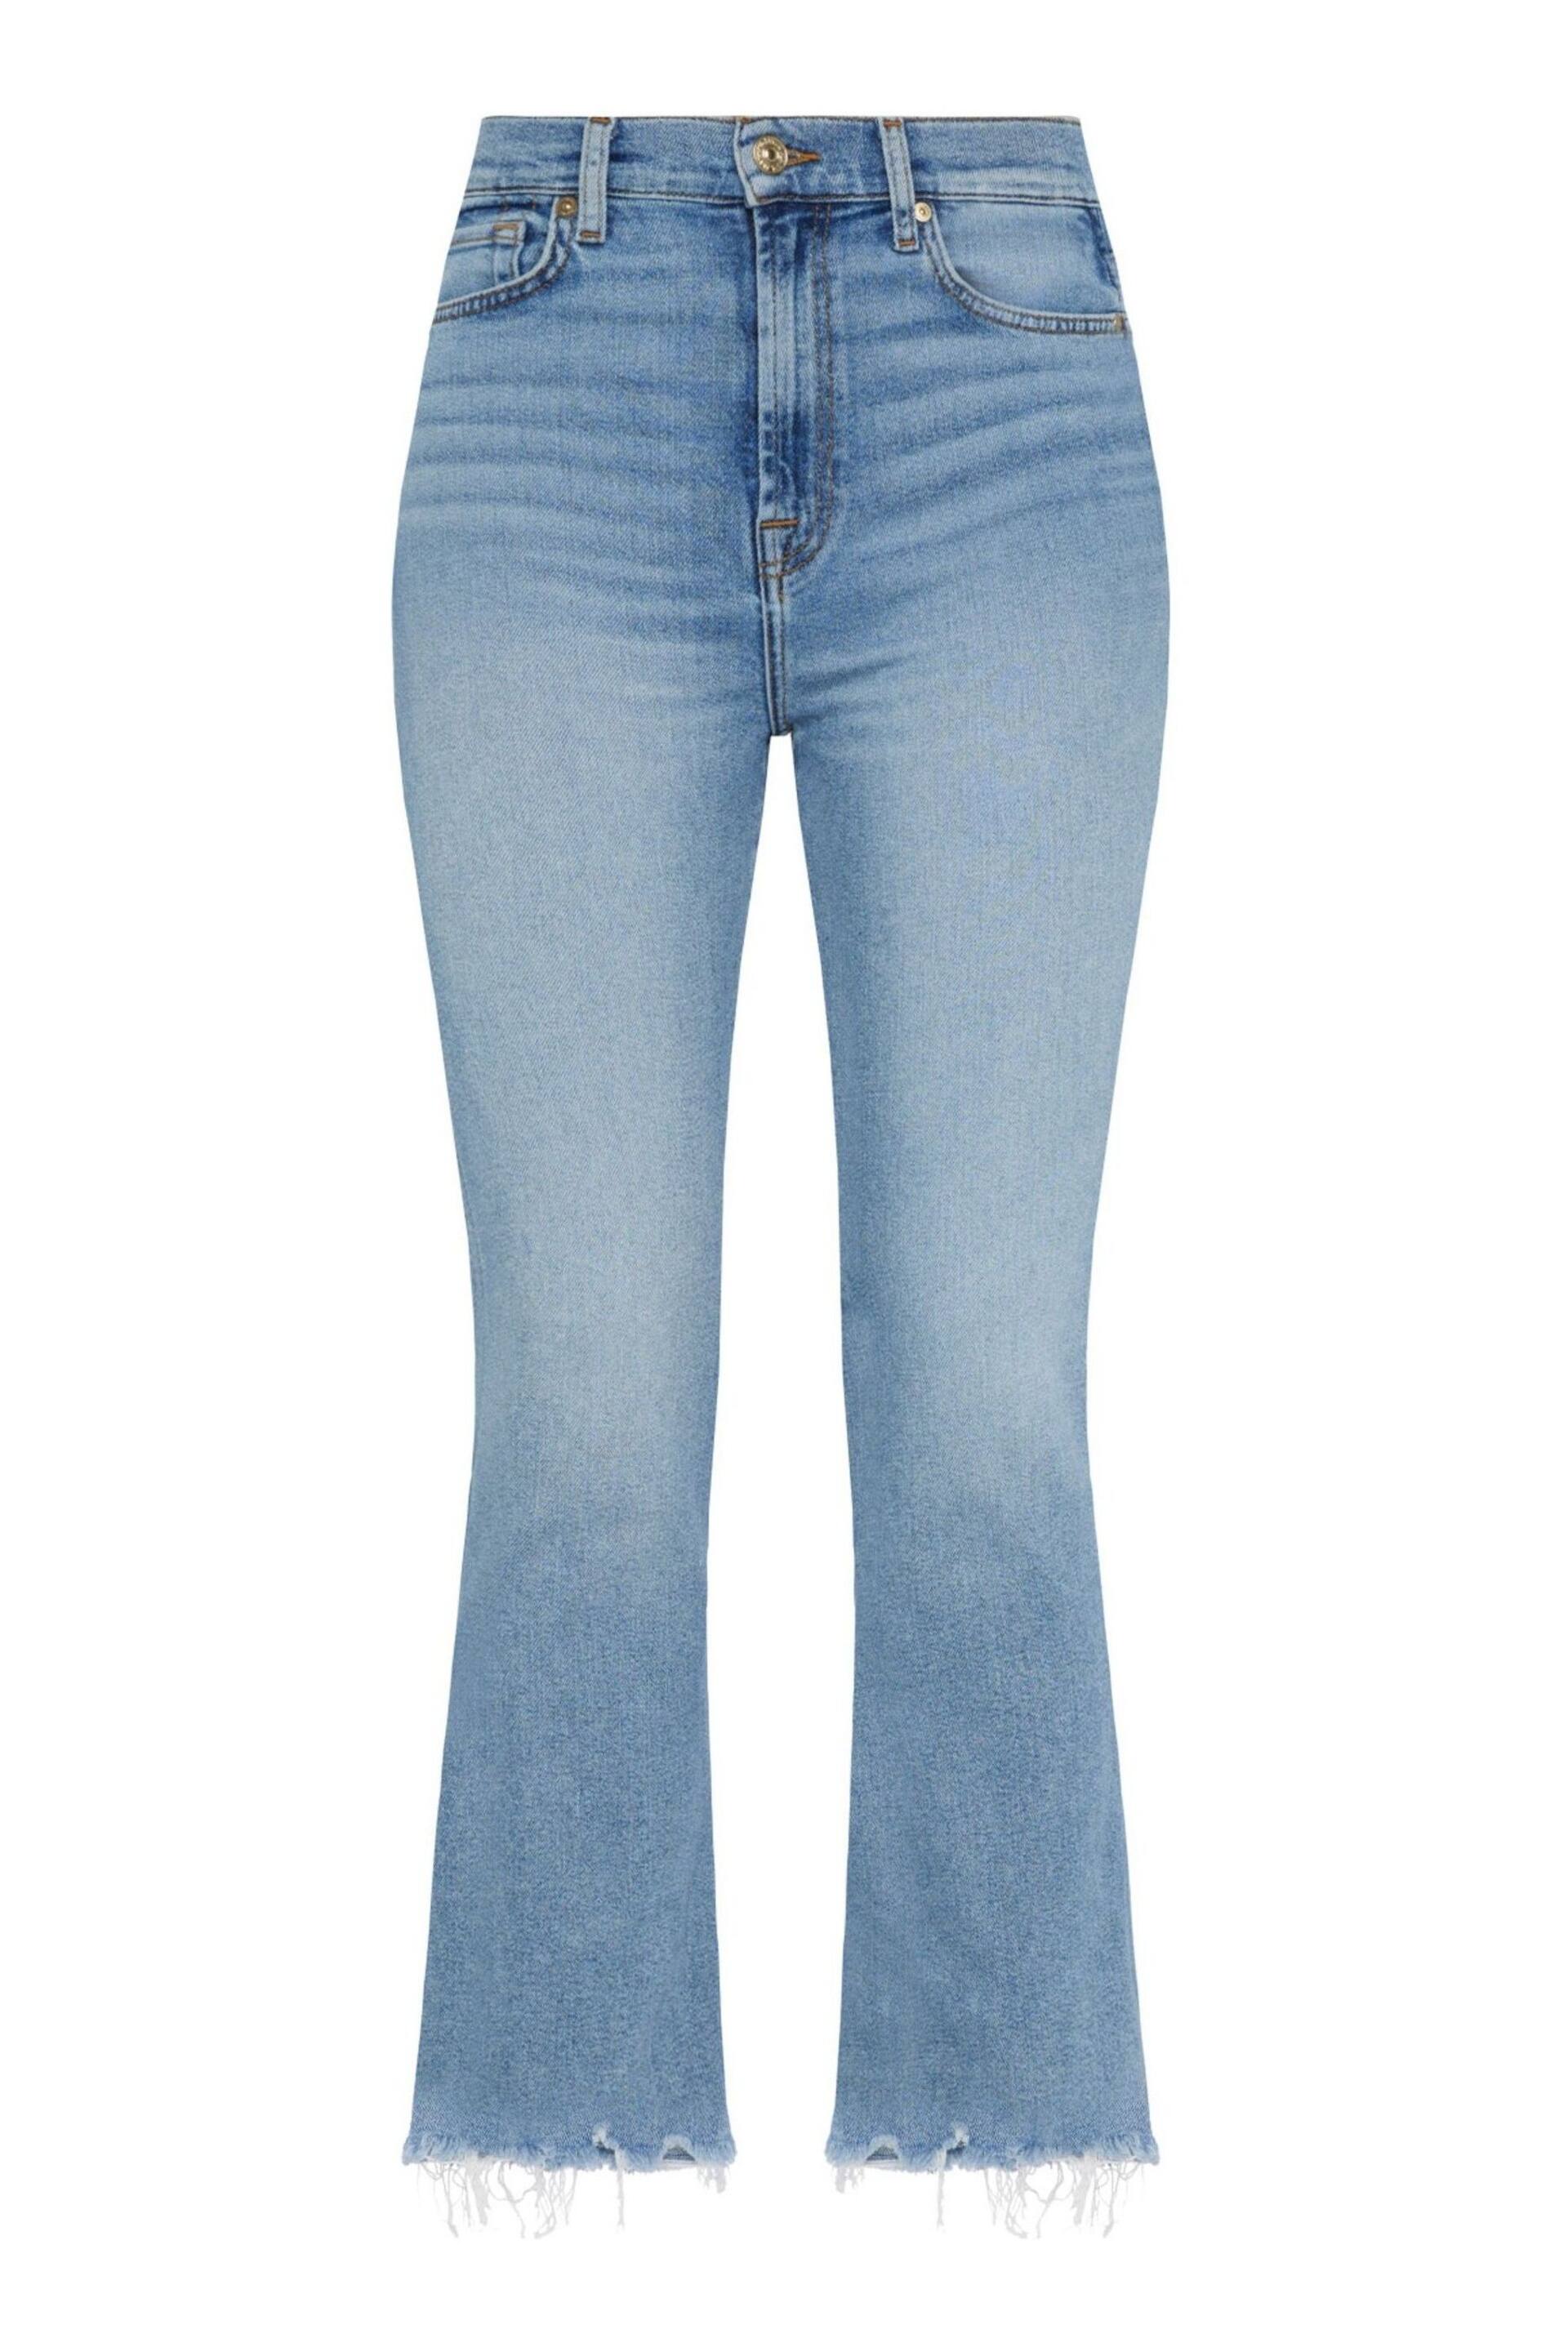 7 For All Mankind Slim Kick Flare Luxe Raw Hem Blue Jeans - Image 3 of 3